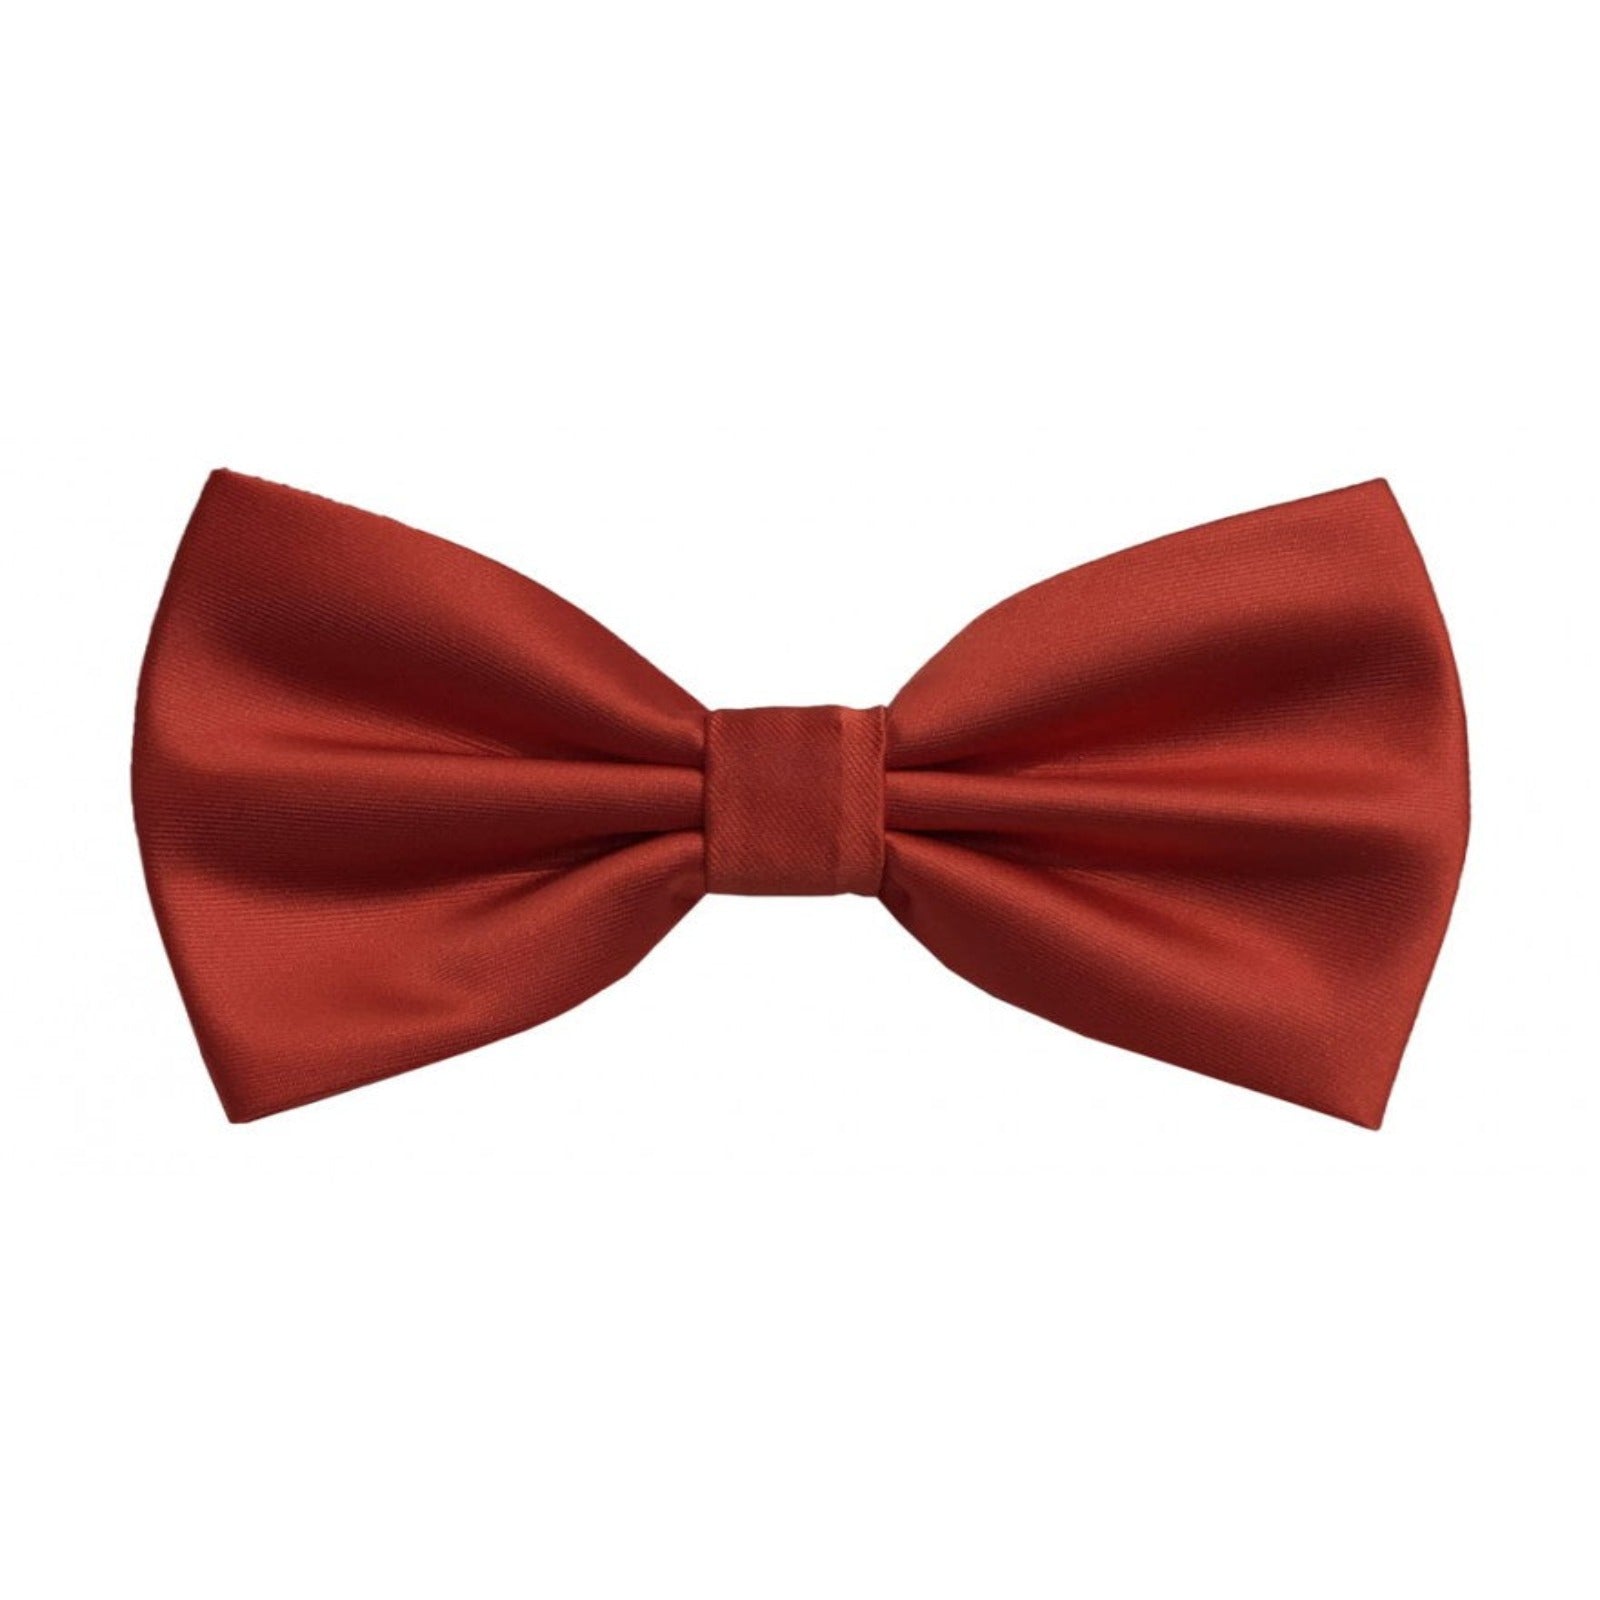 Classic True Red Bowtie With Matching Pocket Square | KCT Menswear 